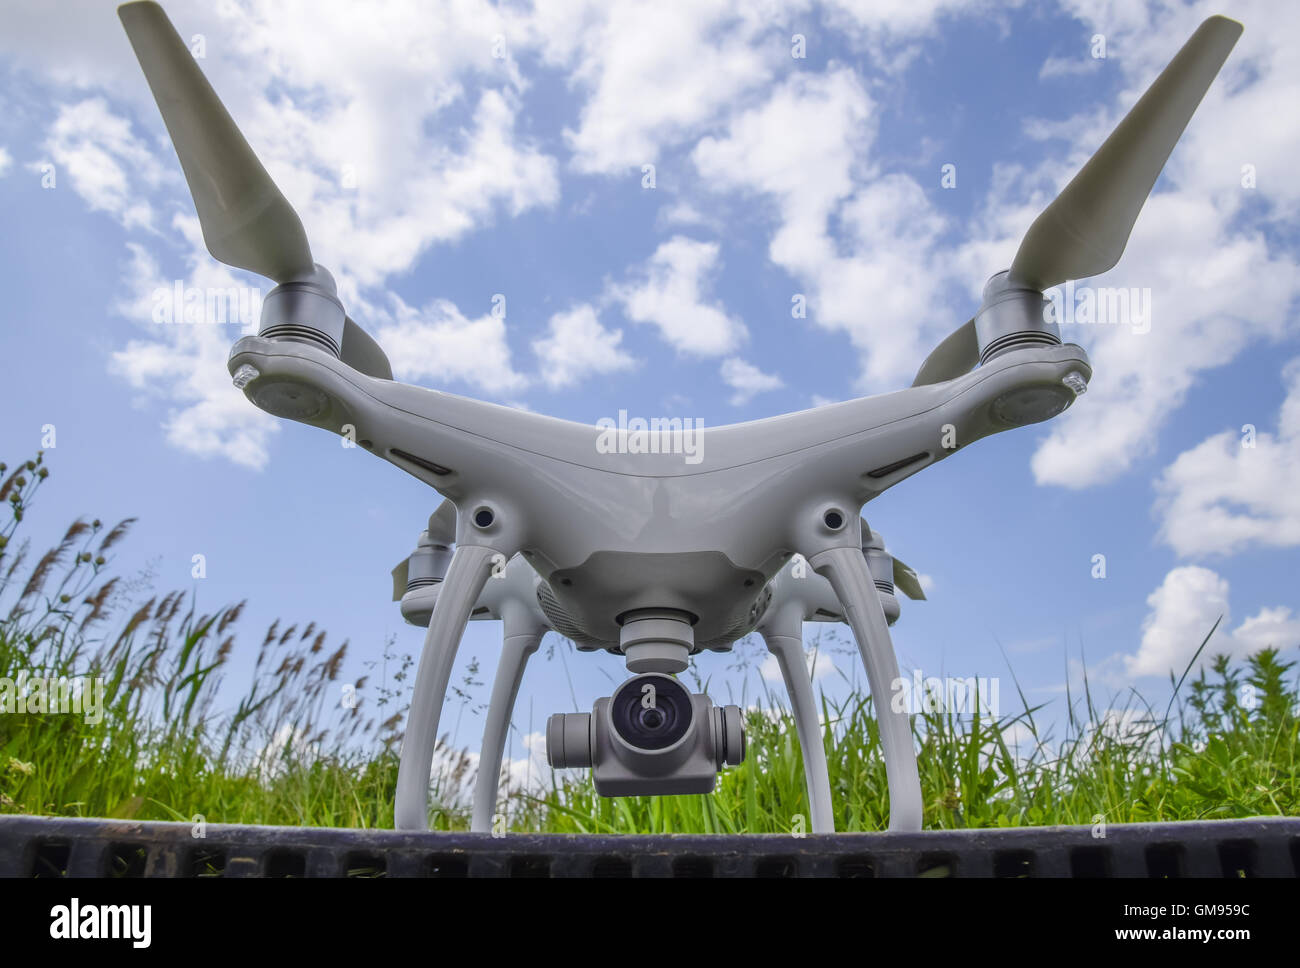 Quadrocopters on a plastic box in the grass. Preparation quadrocopter to fly. Stock Photo